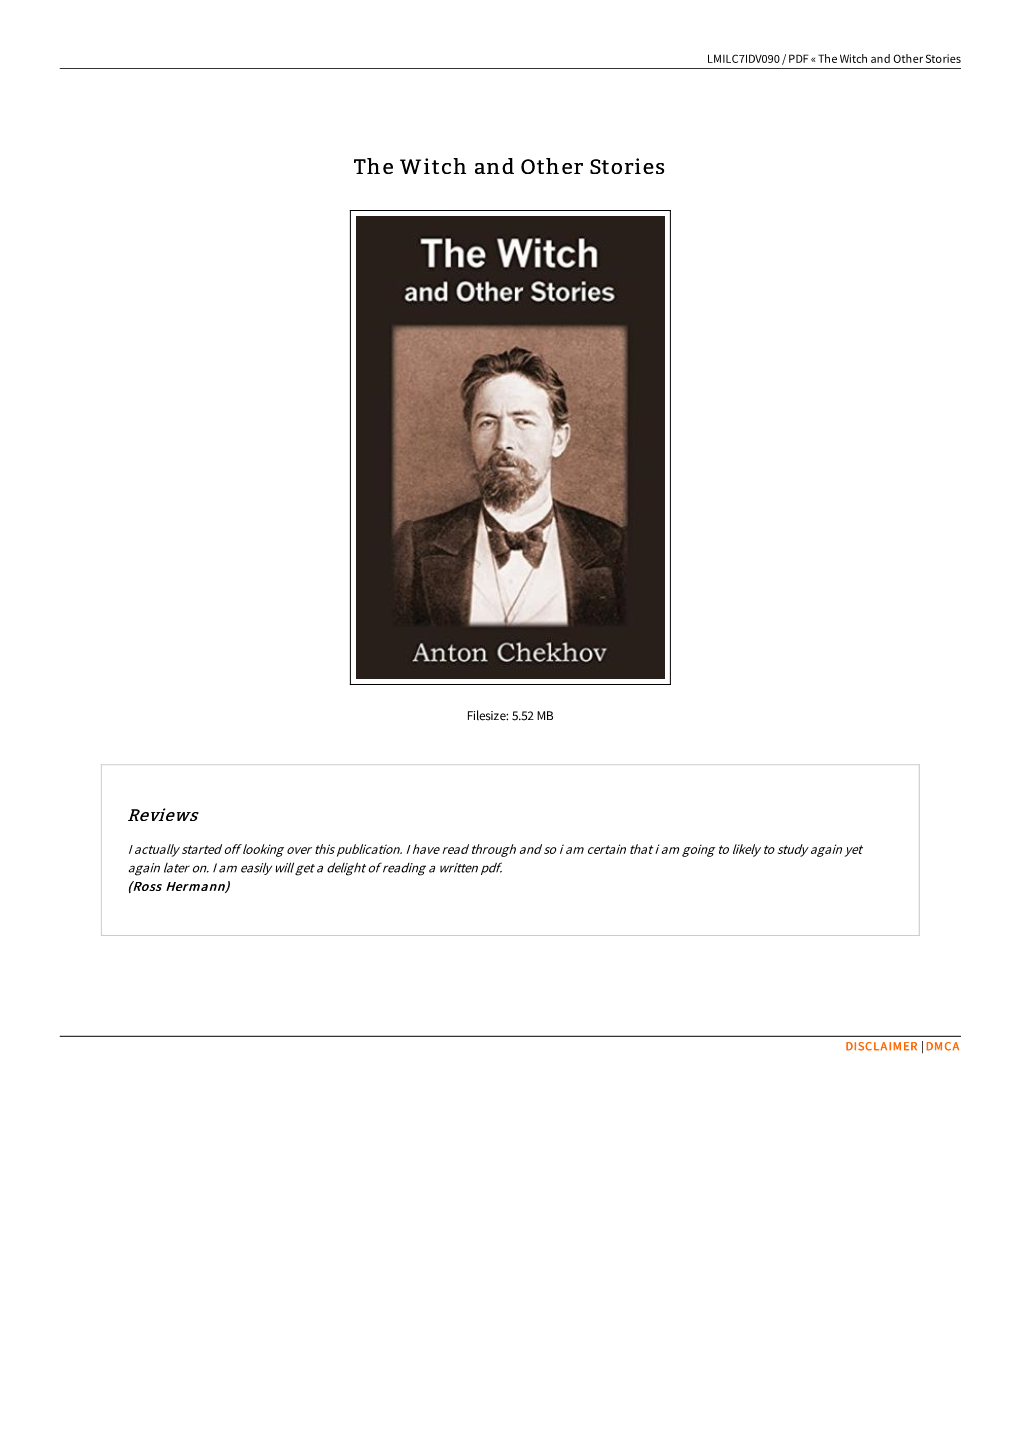 Read Book &lt; the Witch and Other Stories ~ OAJMB95VKN3T